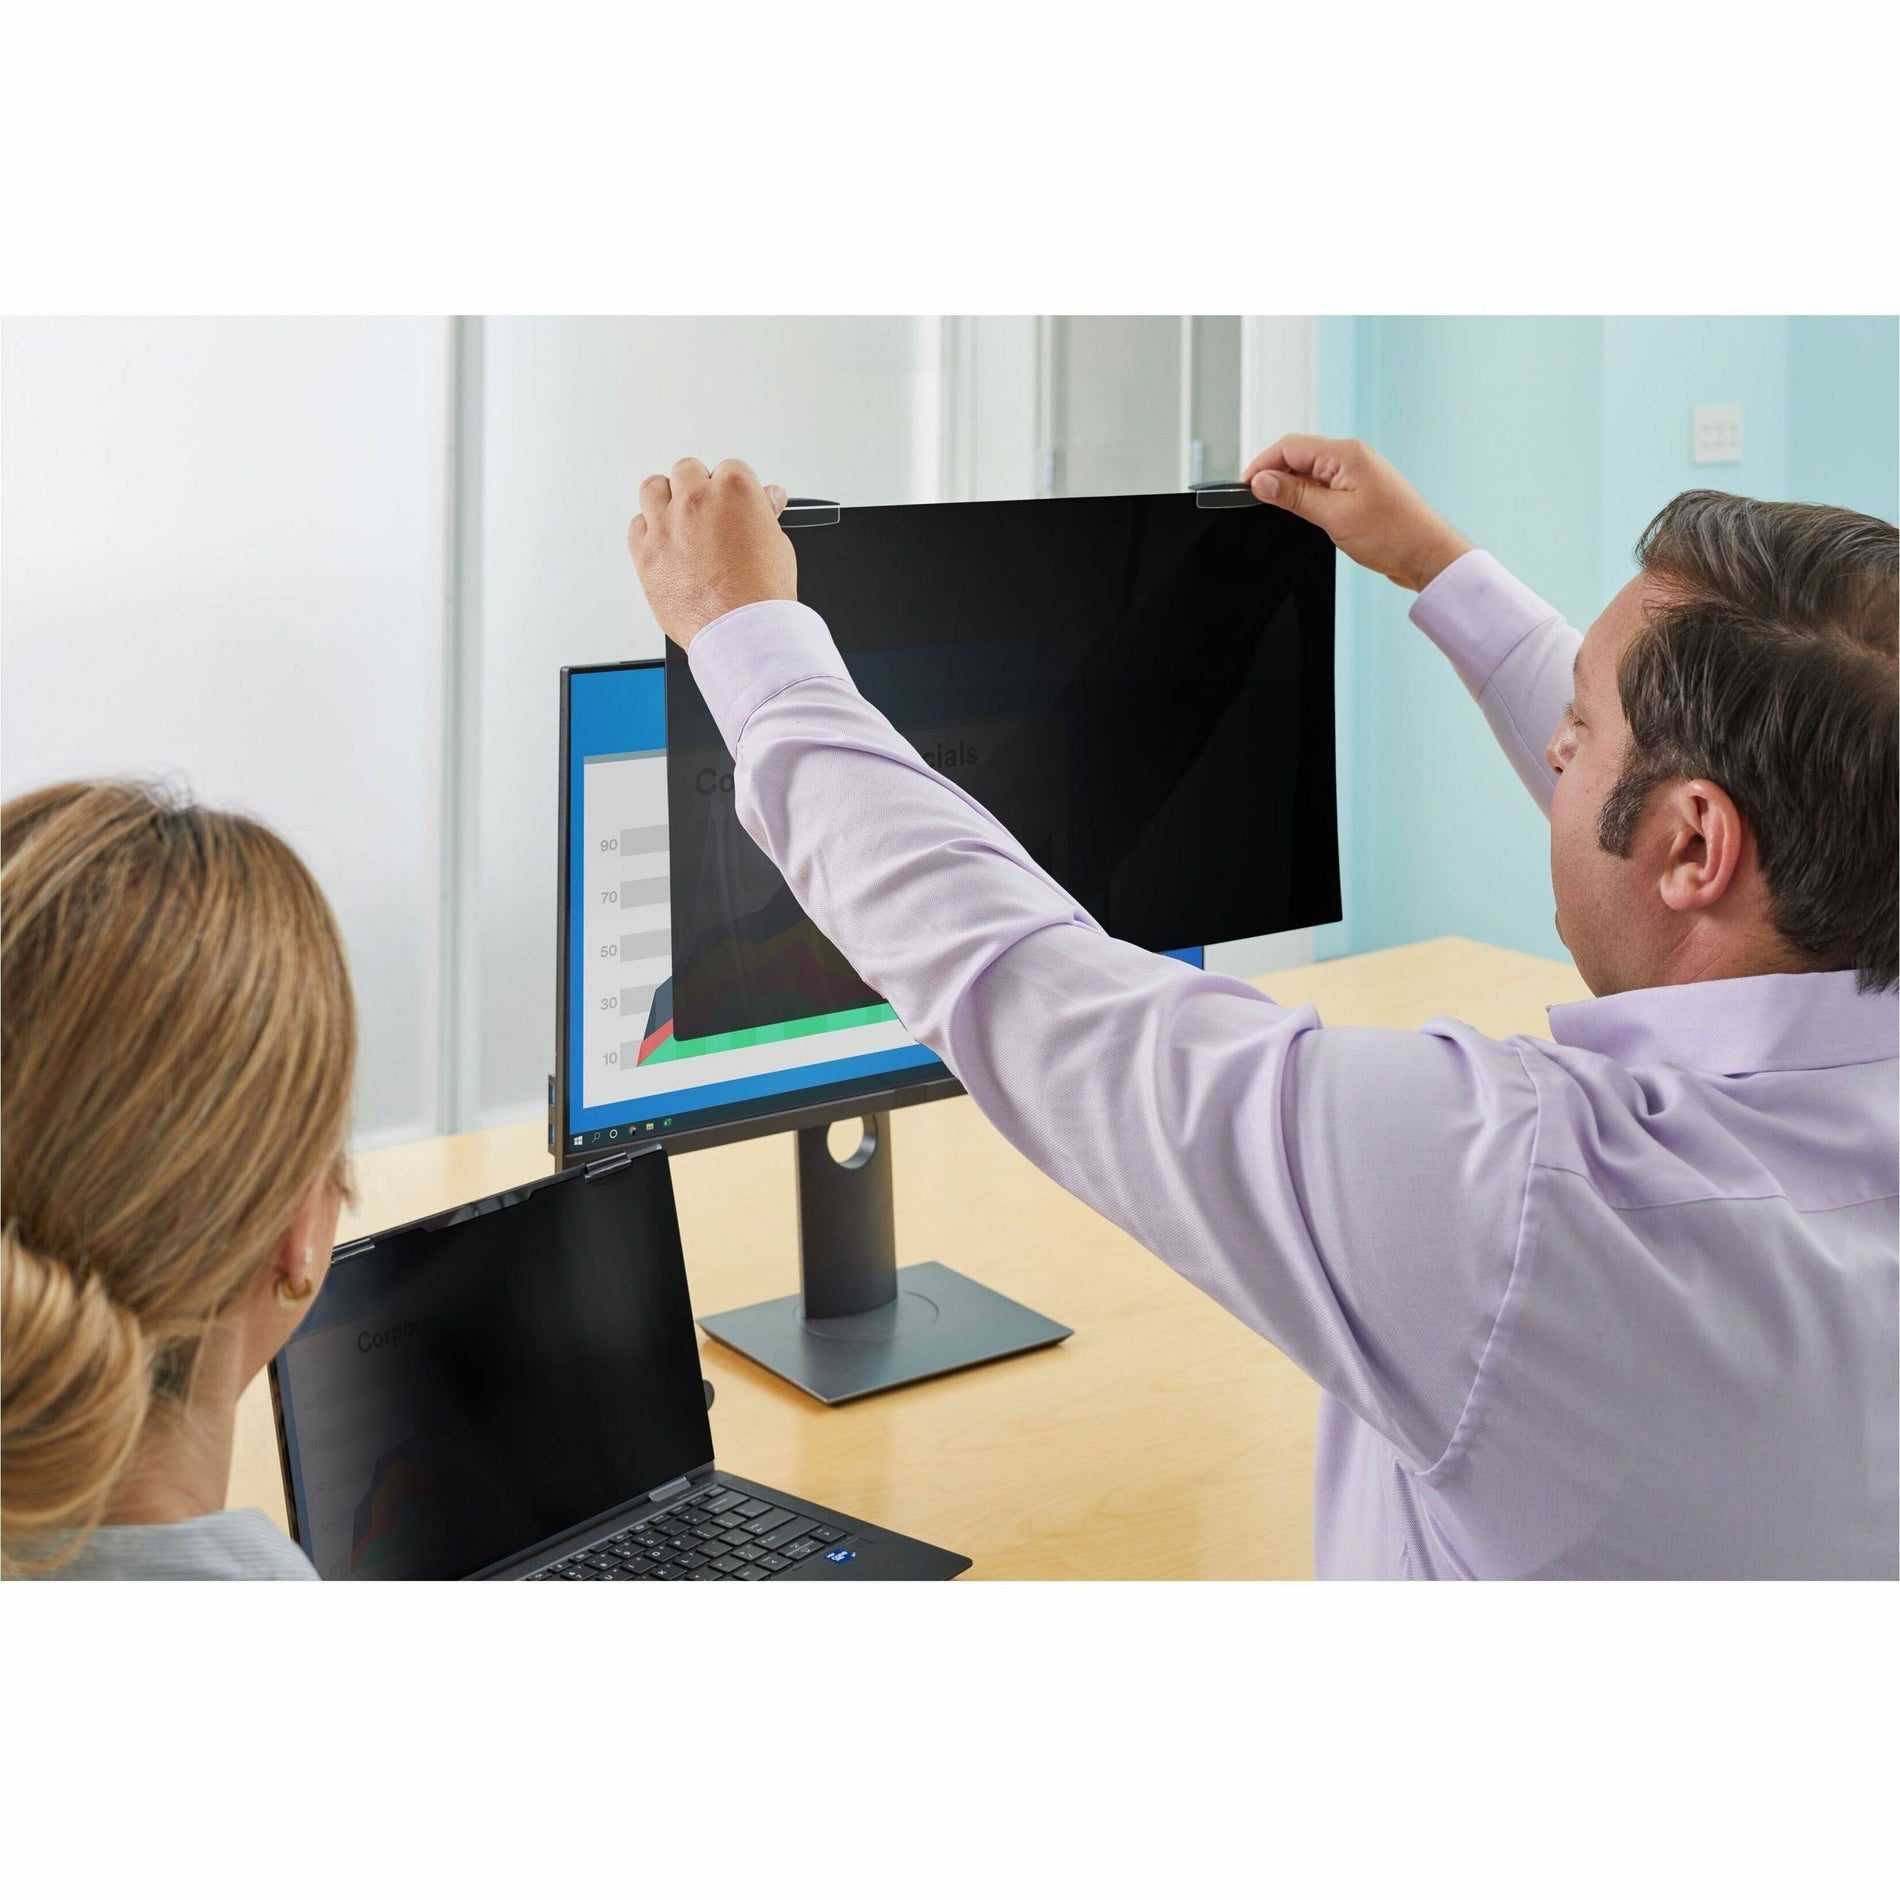 3M PF215W9EM Privacy Screen Filter, 21.5" Widescreen, Blue Light Reduction, Magnetic Attach